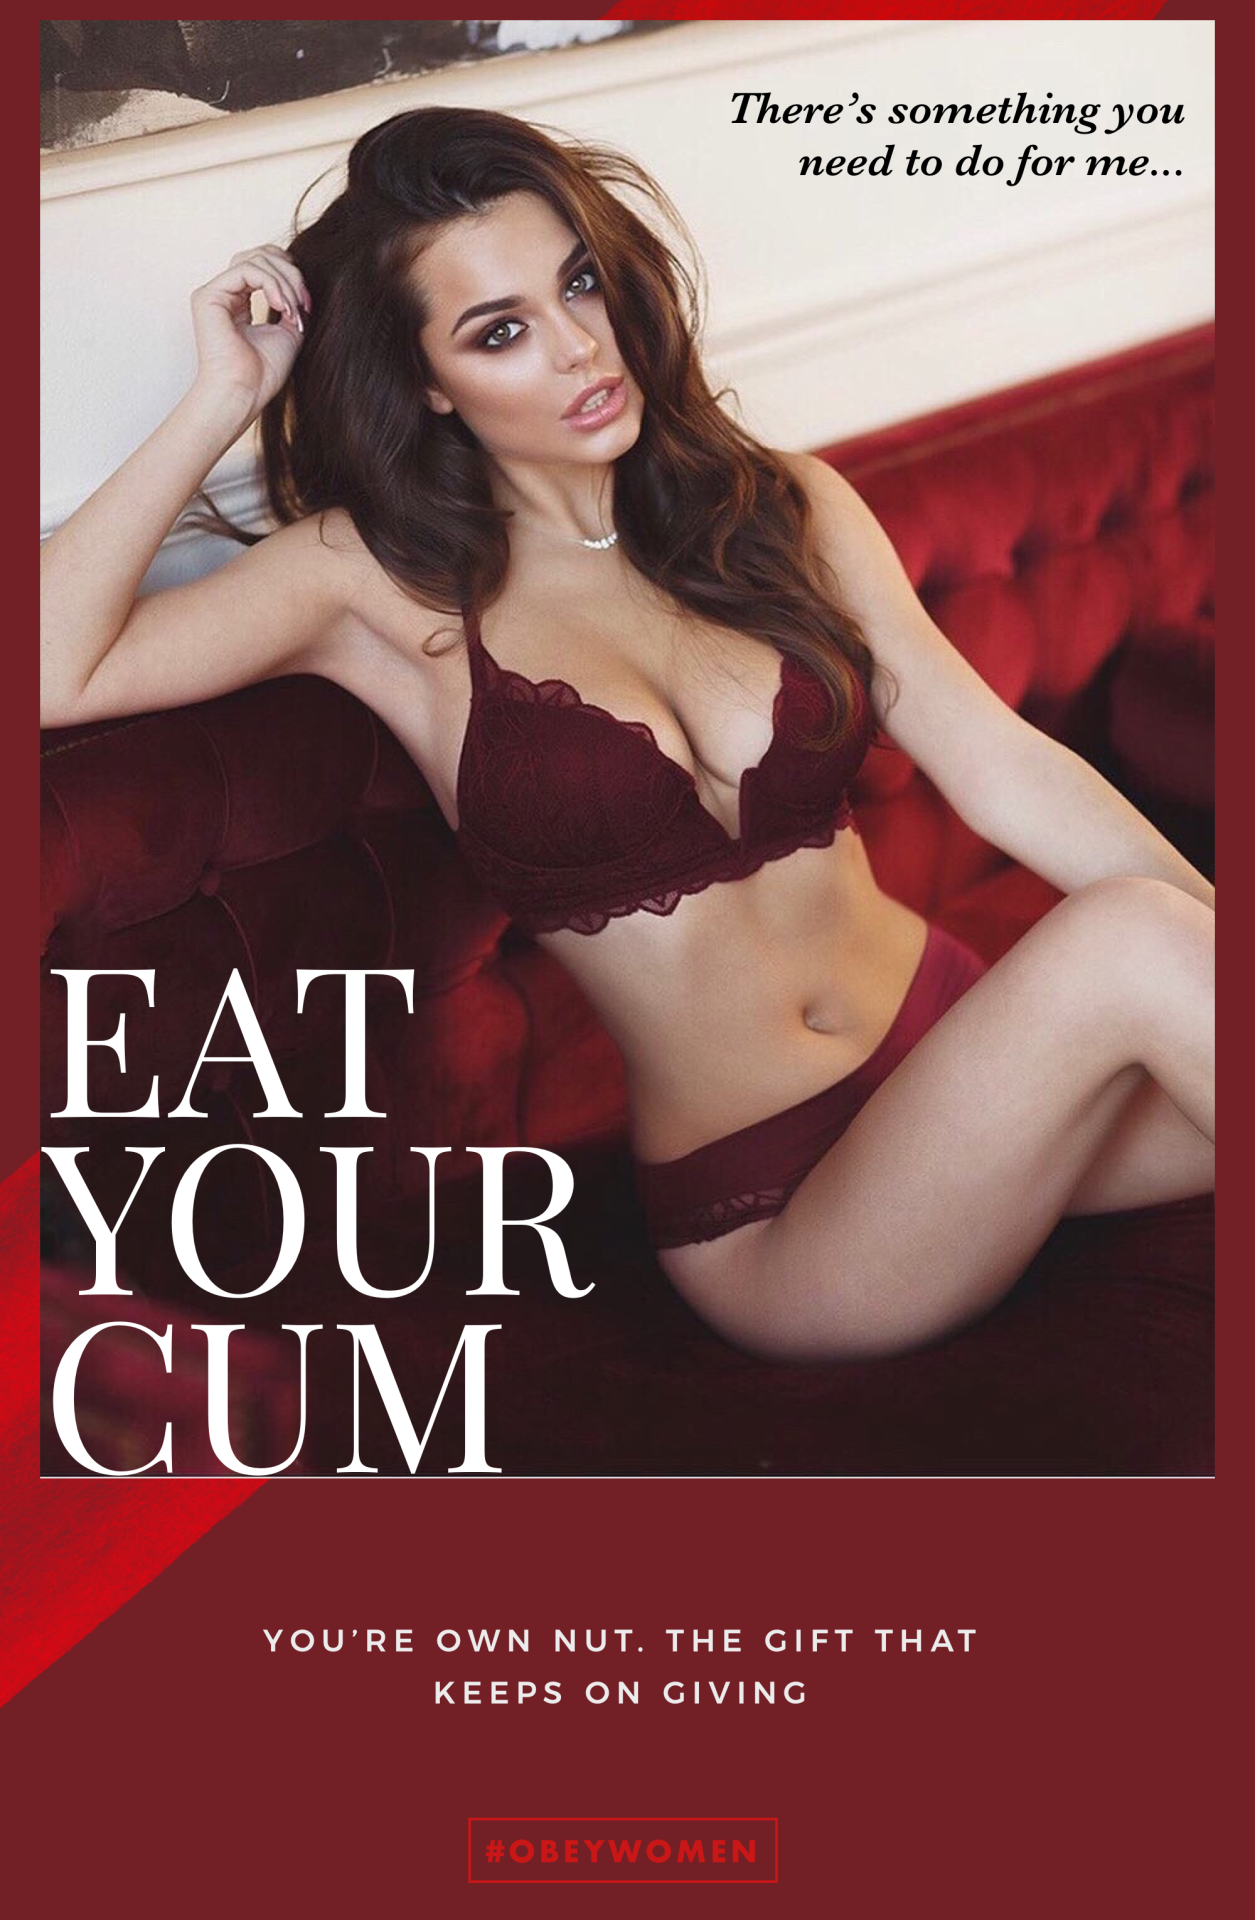 Just Stay Beta â€” Do something nice for her, eat your cum. Hey...